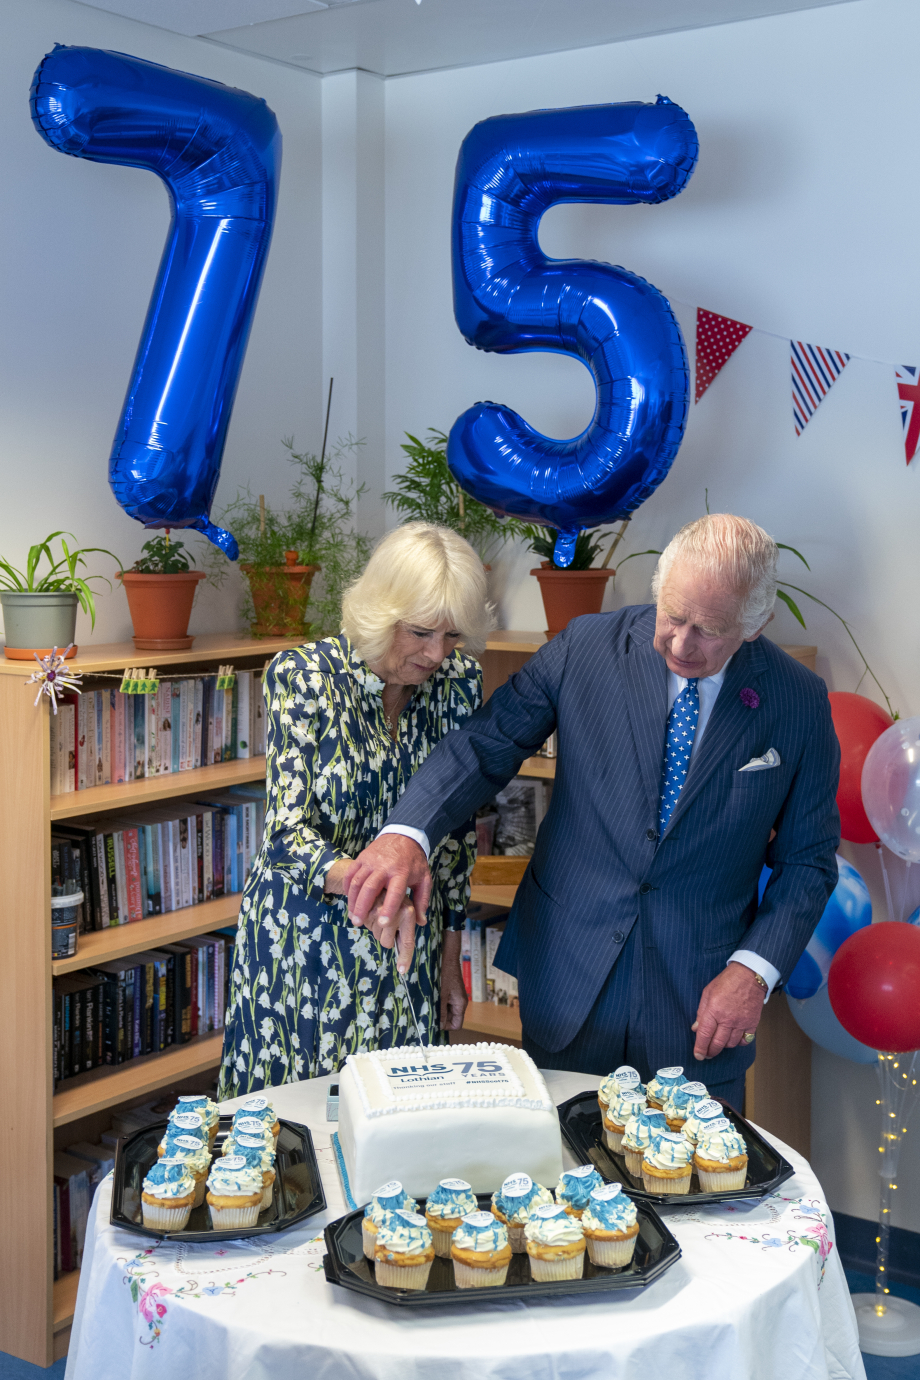 Their Majesties cut a cake to mark the 75th anniversary of the NHS.